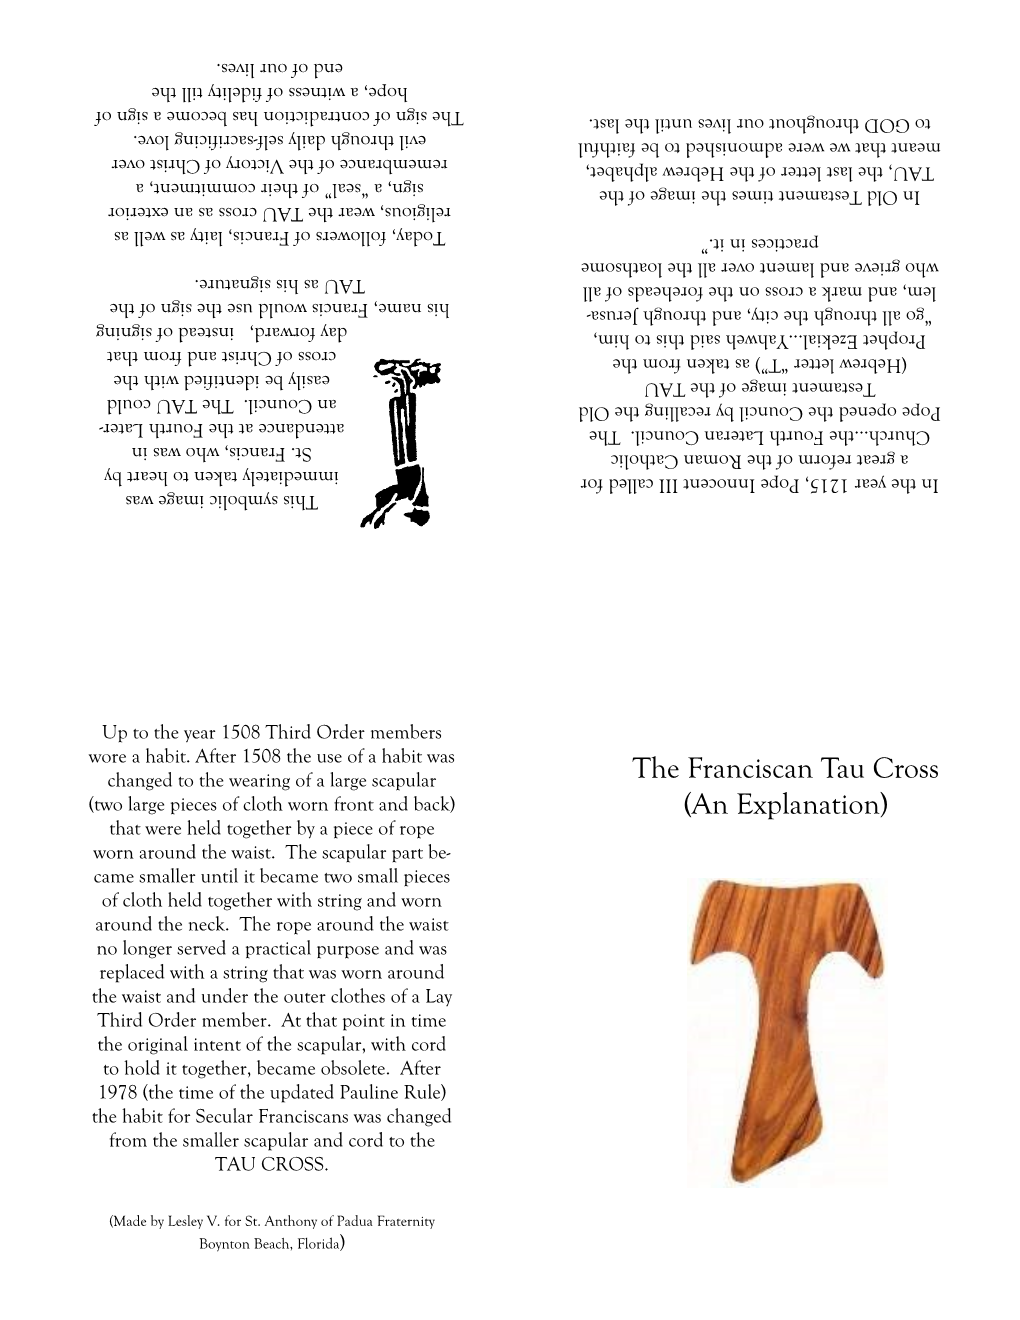 The Franciscan Tau Cross (An Explanation)